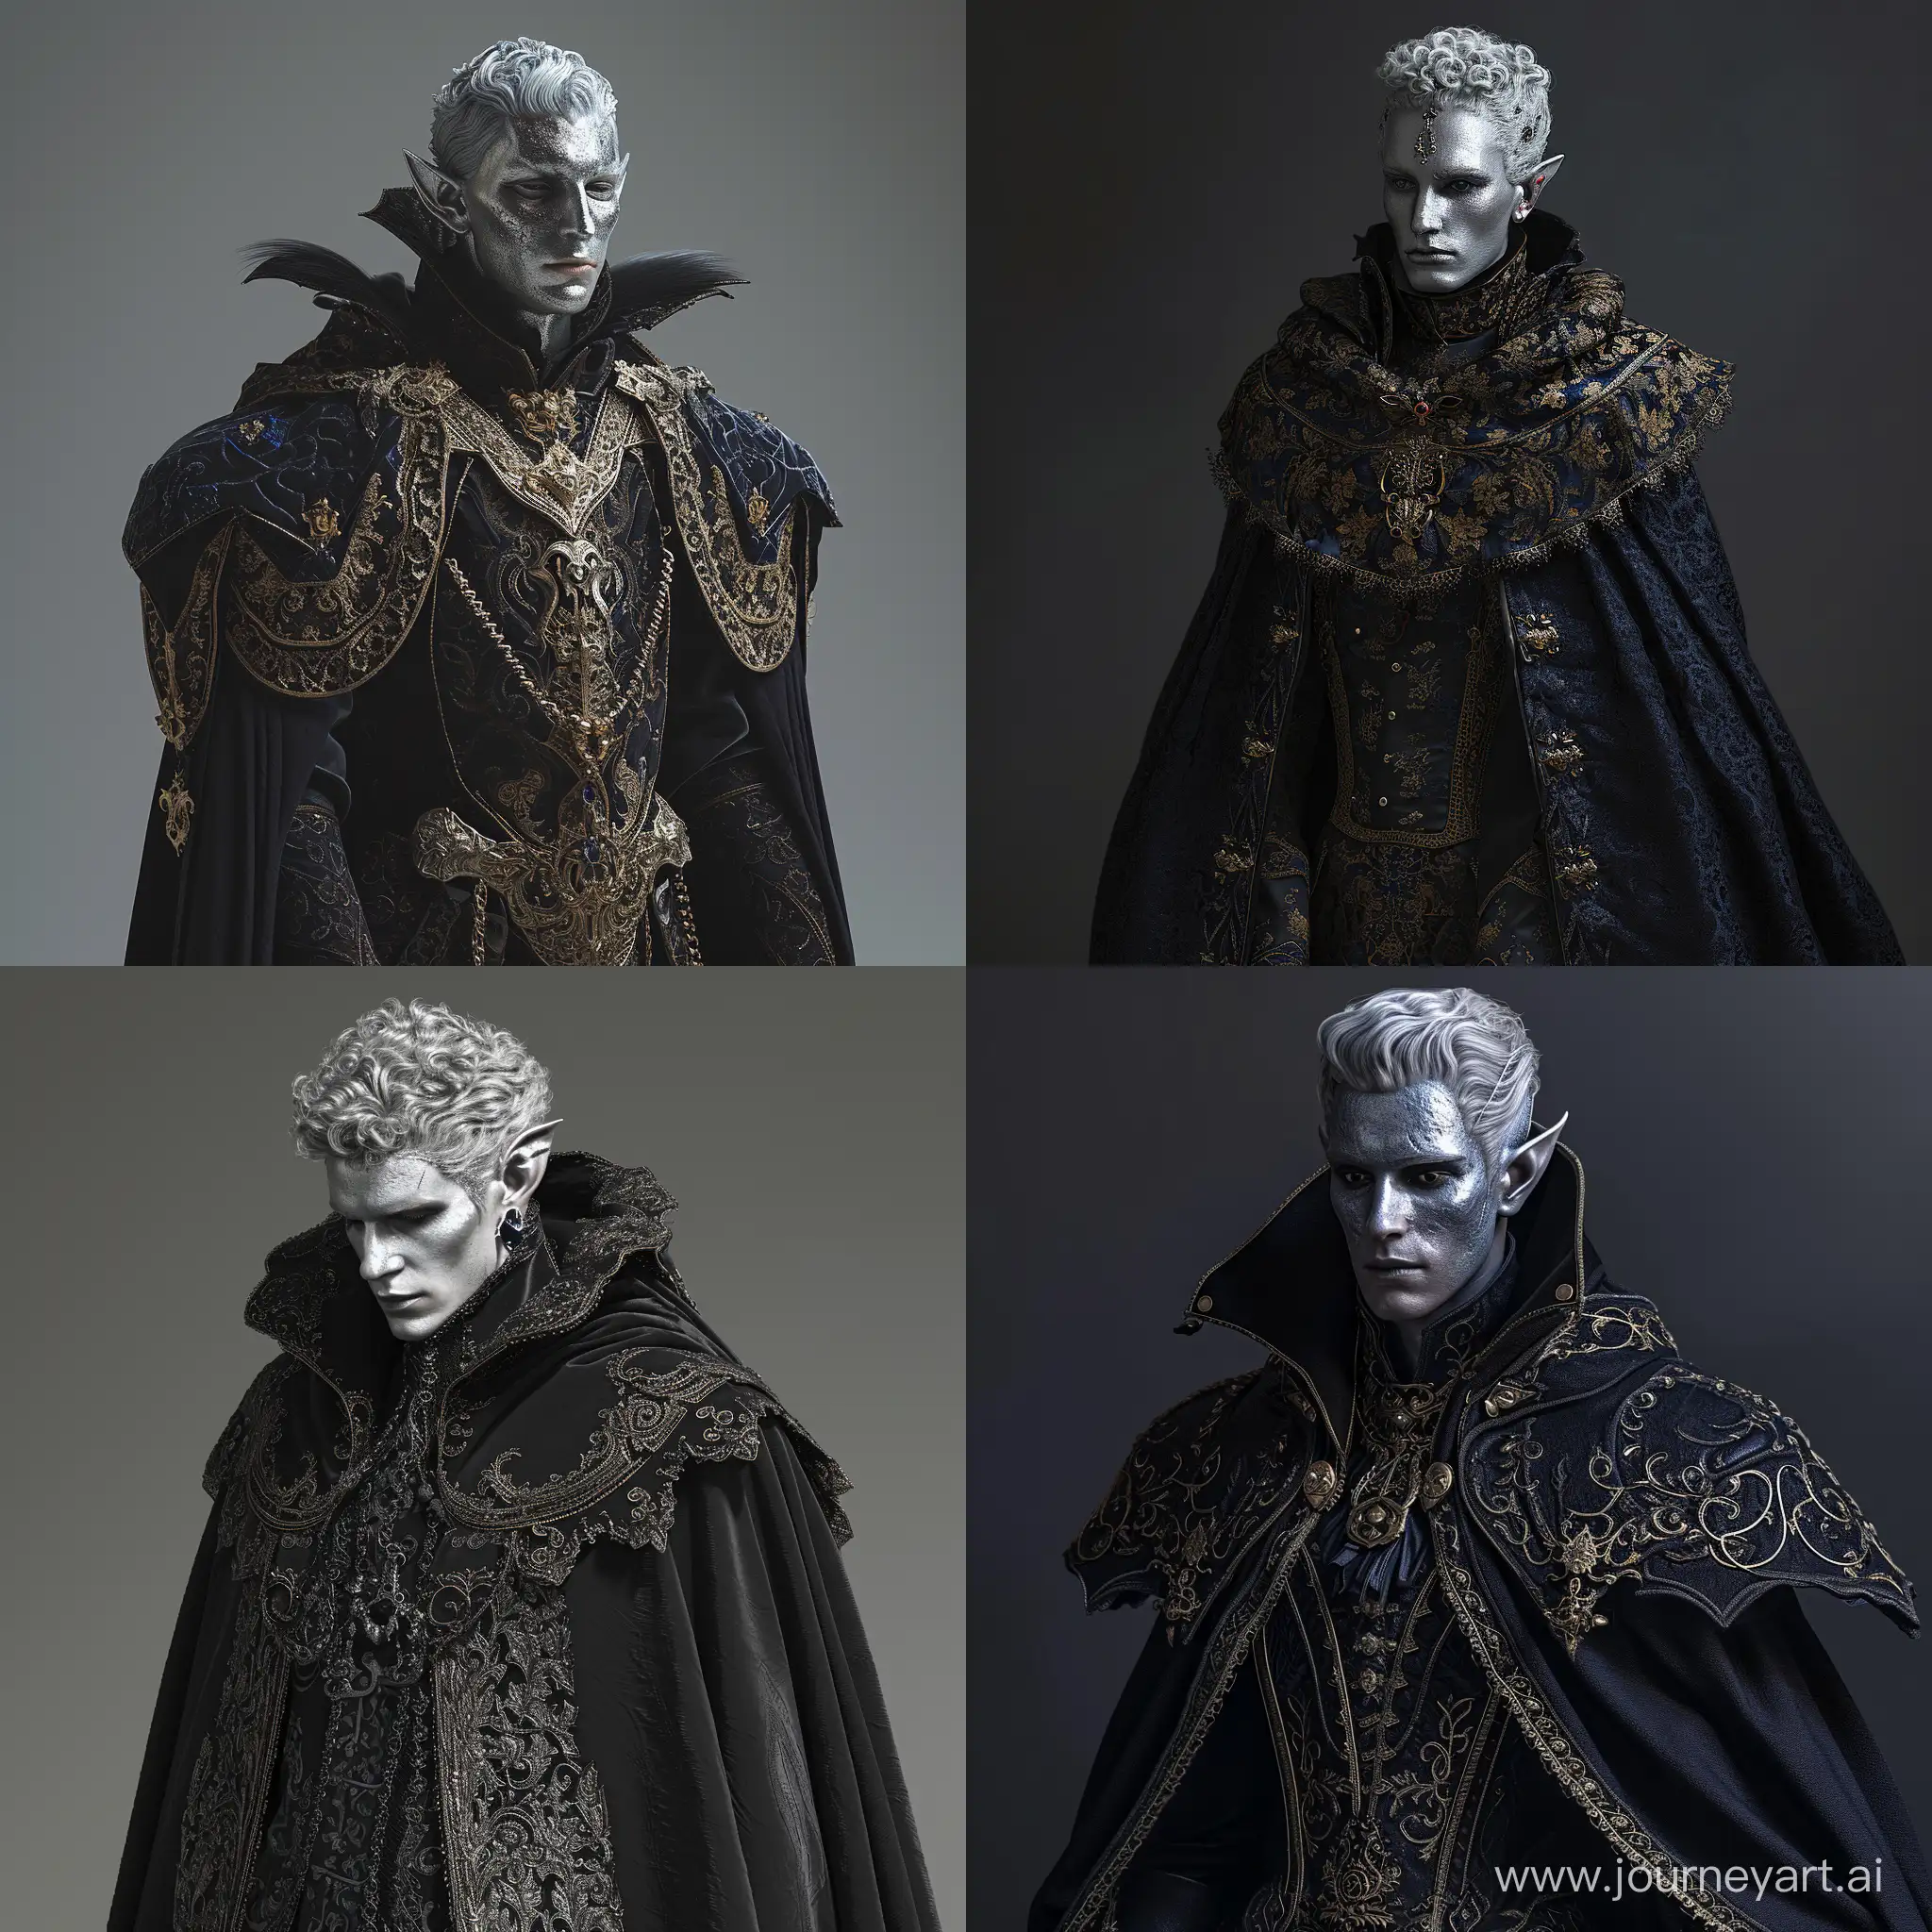 Man in costume, character inspired by Sigurd Svein, cgsociety trends, rococo, male elf with silver skin, dark ornate royal robes, adult male warrior photo, award winning fashion photo, ornate hair, Dorian Cleavanger, dark cloak, official photo, cg artist